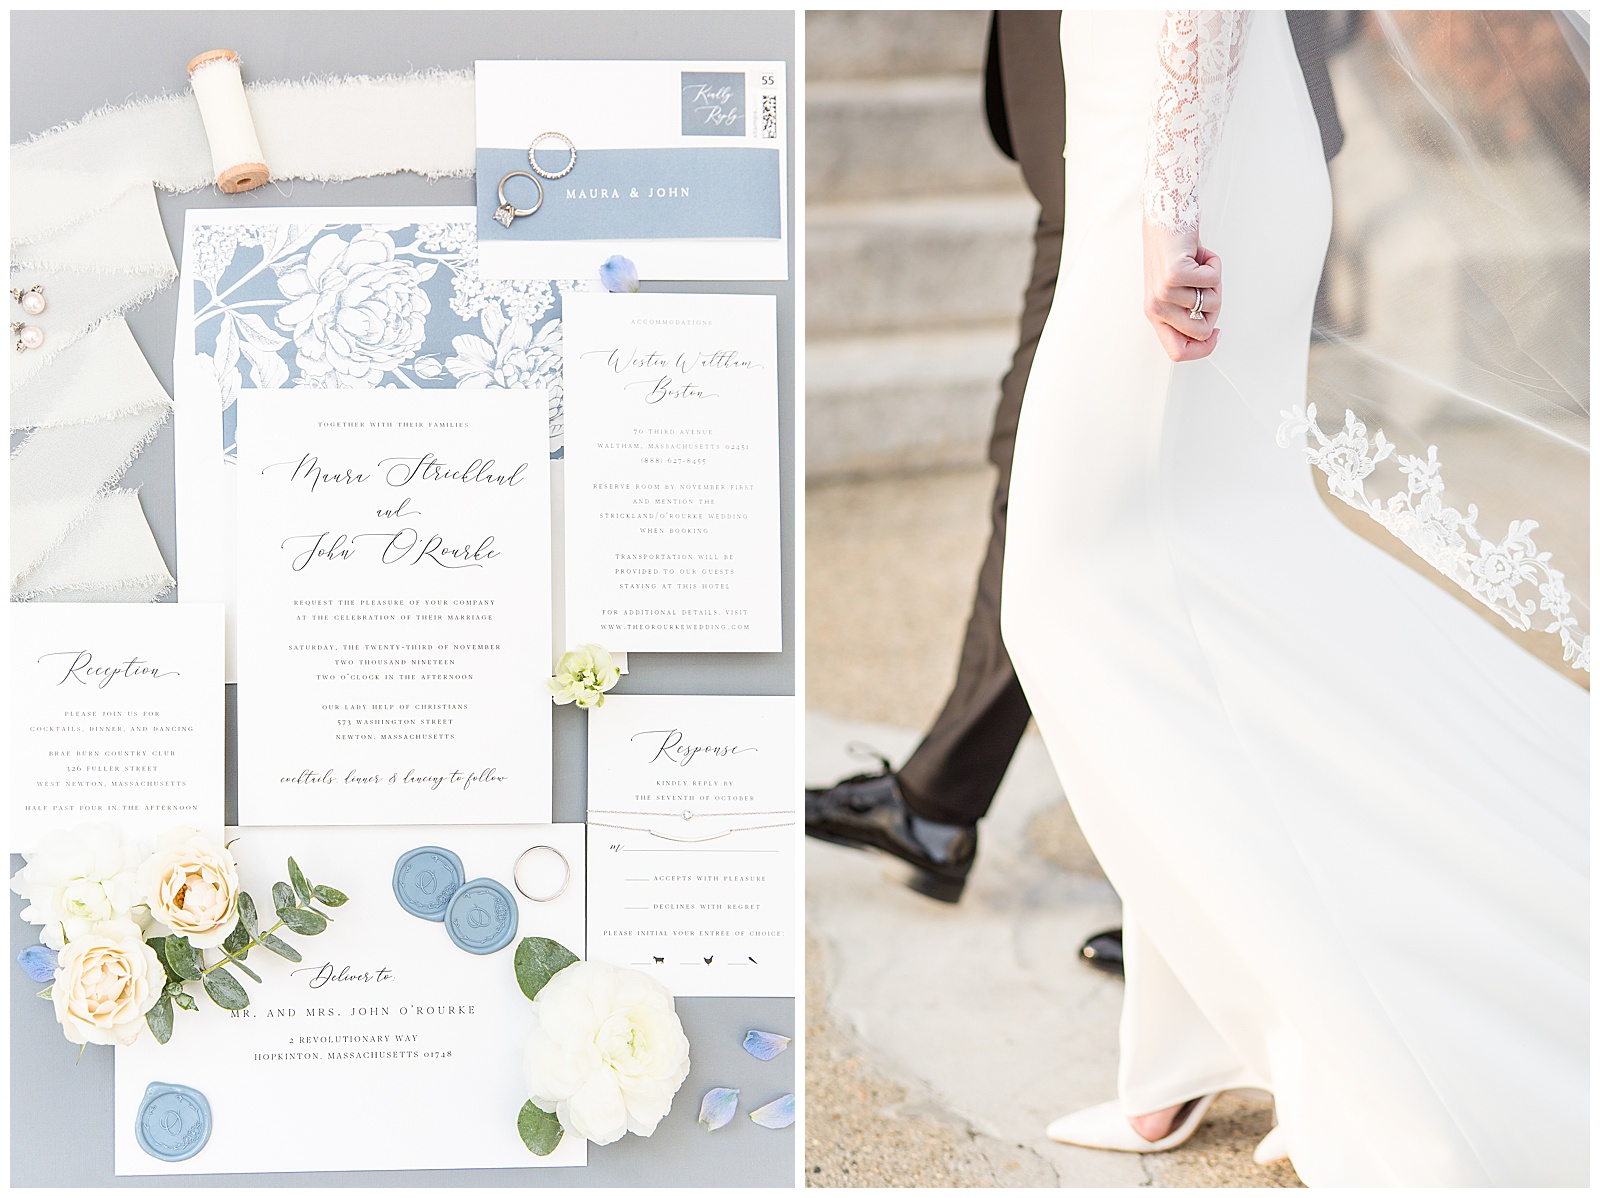 Invitation suite by Shine and designed by Jessica Hennessey Weddings